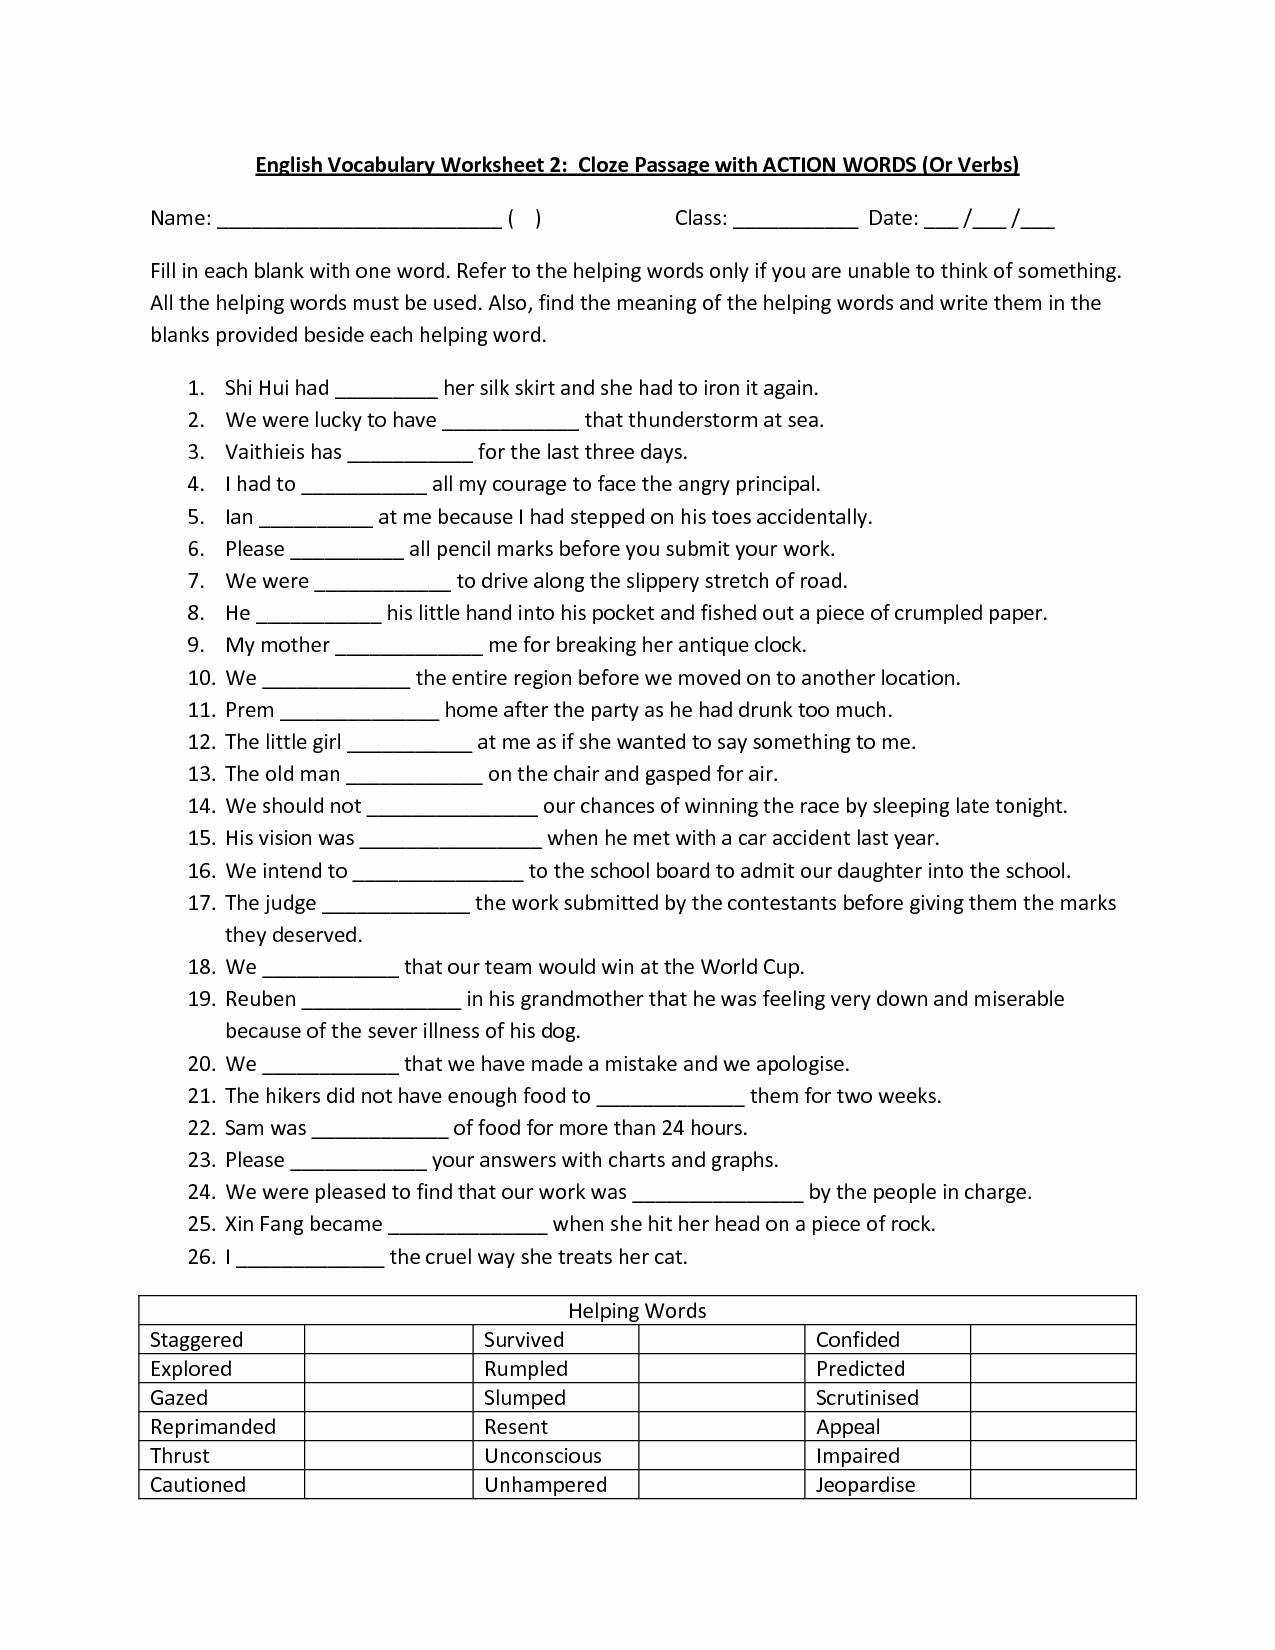 Free Reading Comprehension Worksheets for 3rd Grade Along with Reading Prehension for 2nd Grade Free Worksheets or Famous